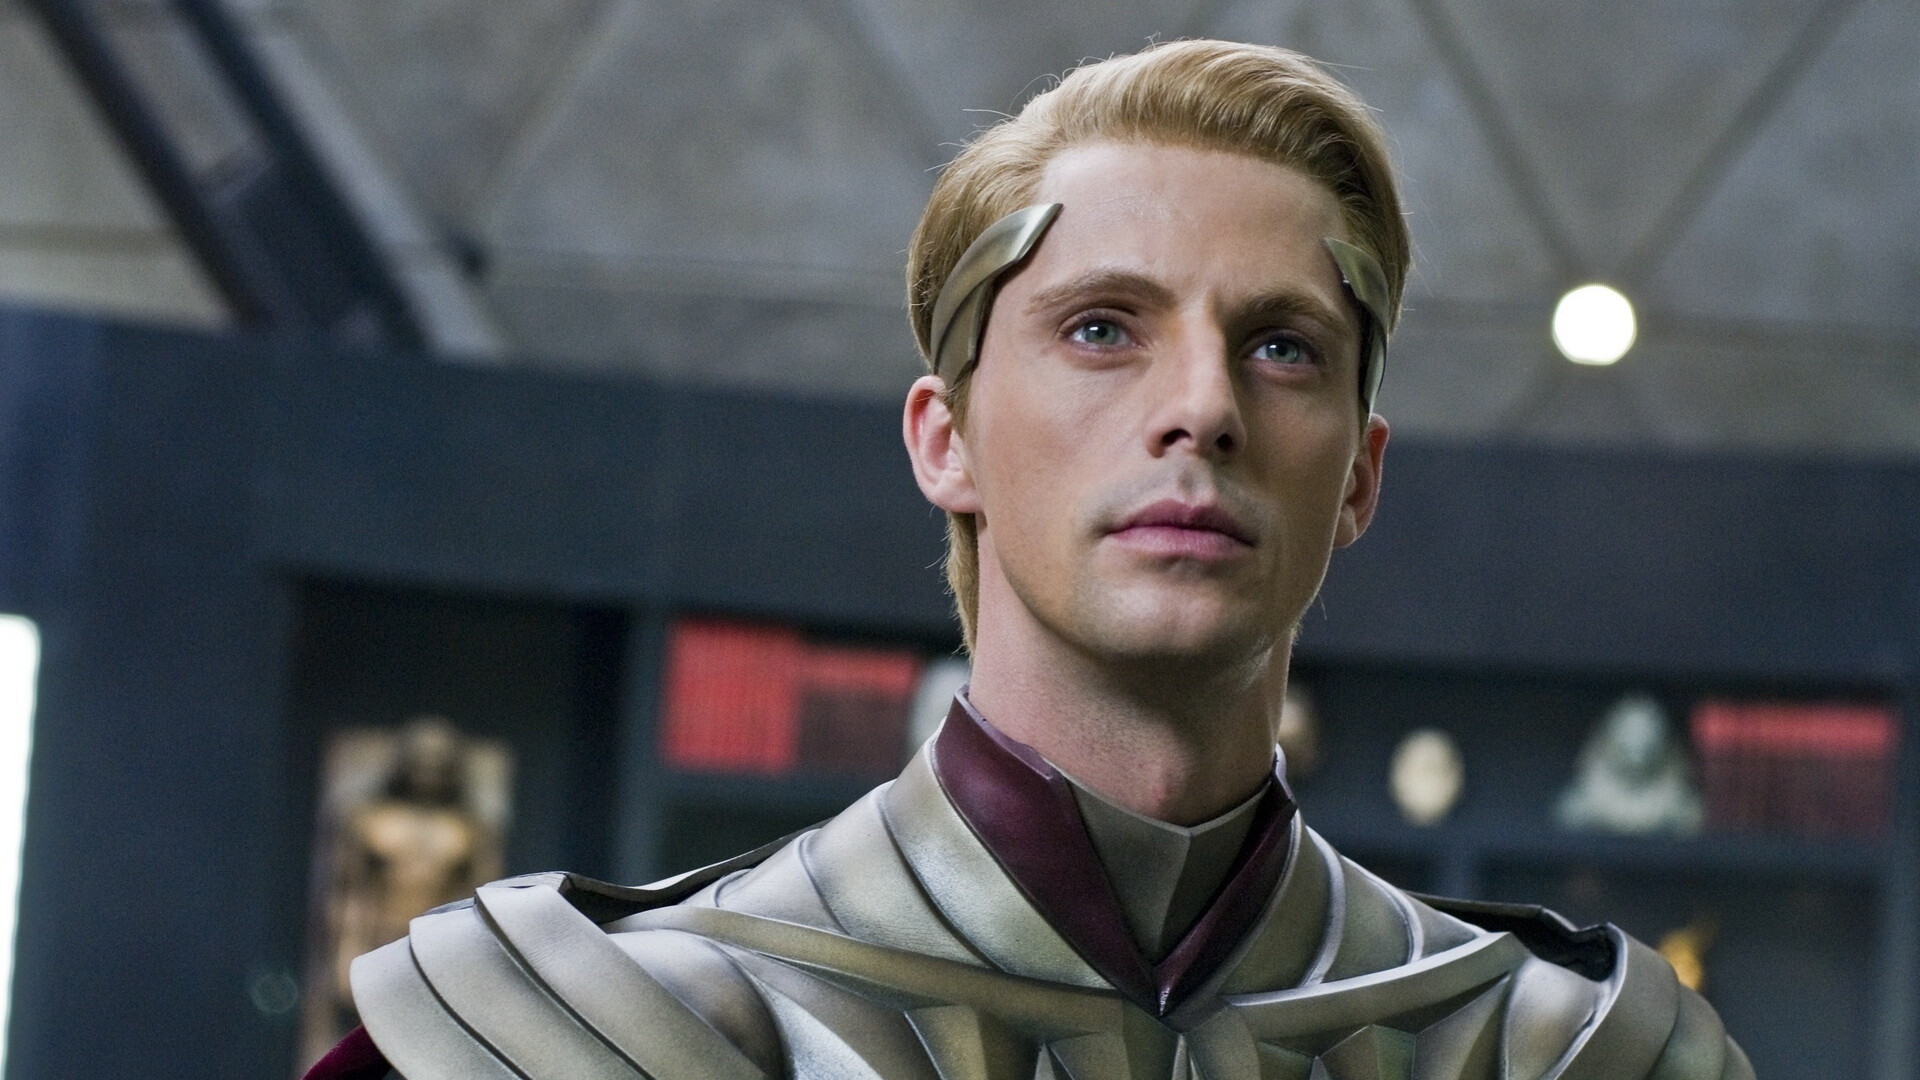 Ozymandias (Watchmen): Veidt, Made his live-action debut in the 2009 film played by Matthew Goode. 1920x1080 Full HD Background.